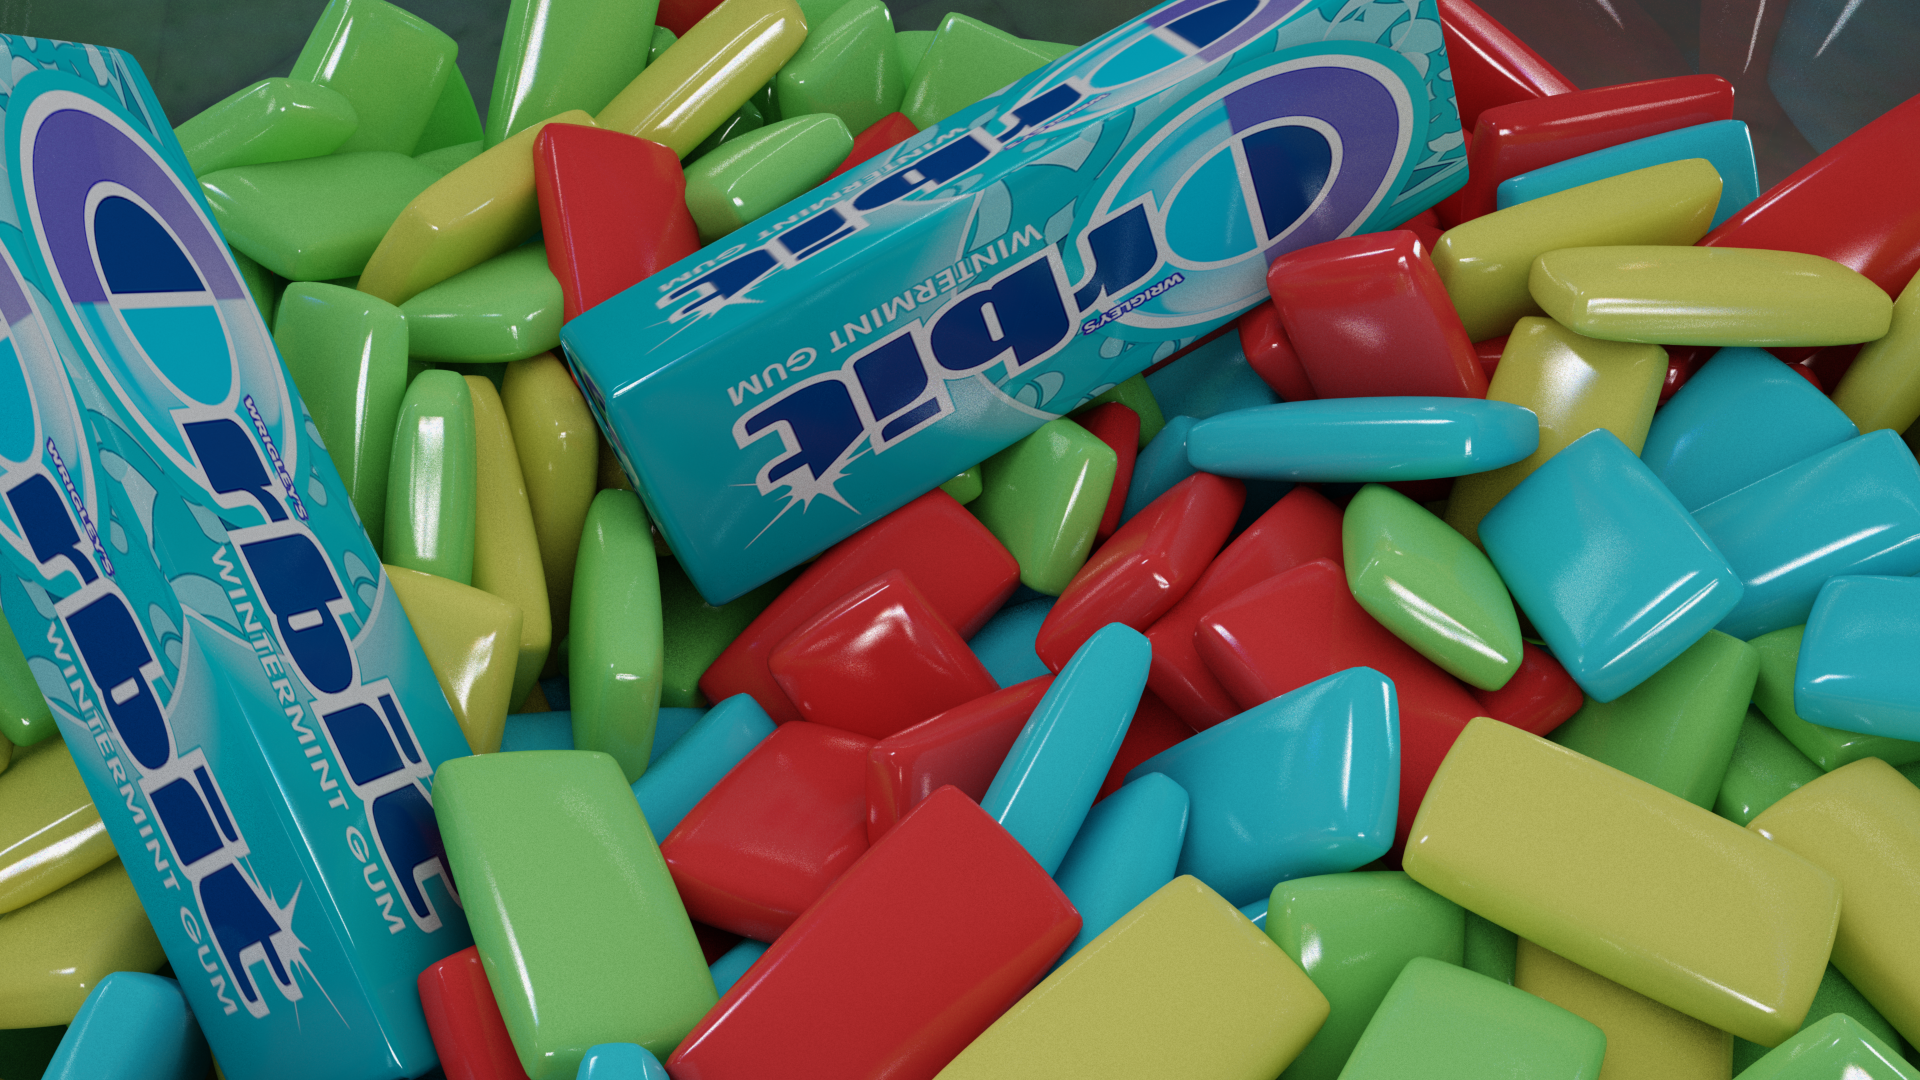 Orbit chewing gum CG animation Wrigley package 3ds max.